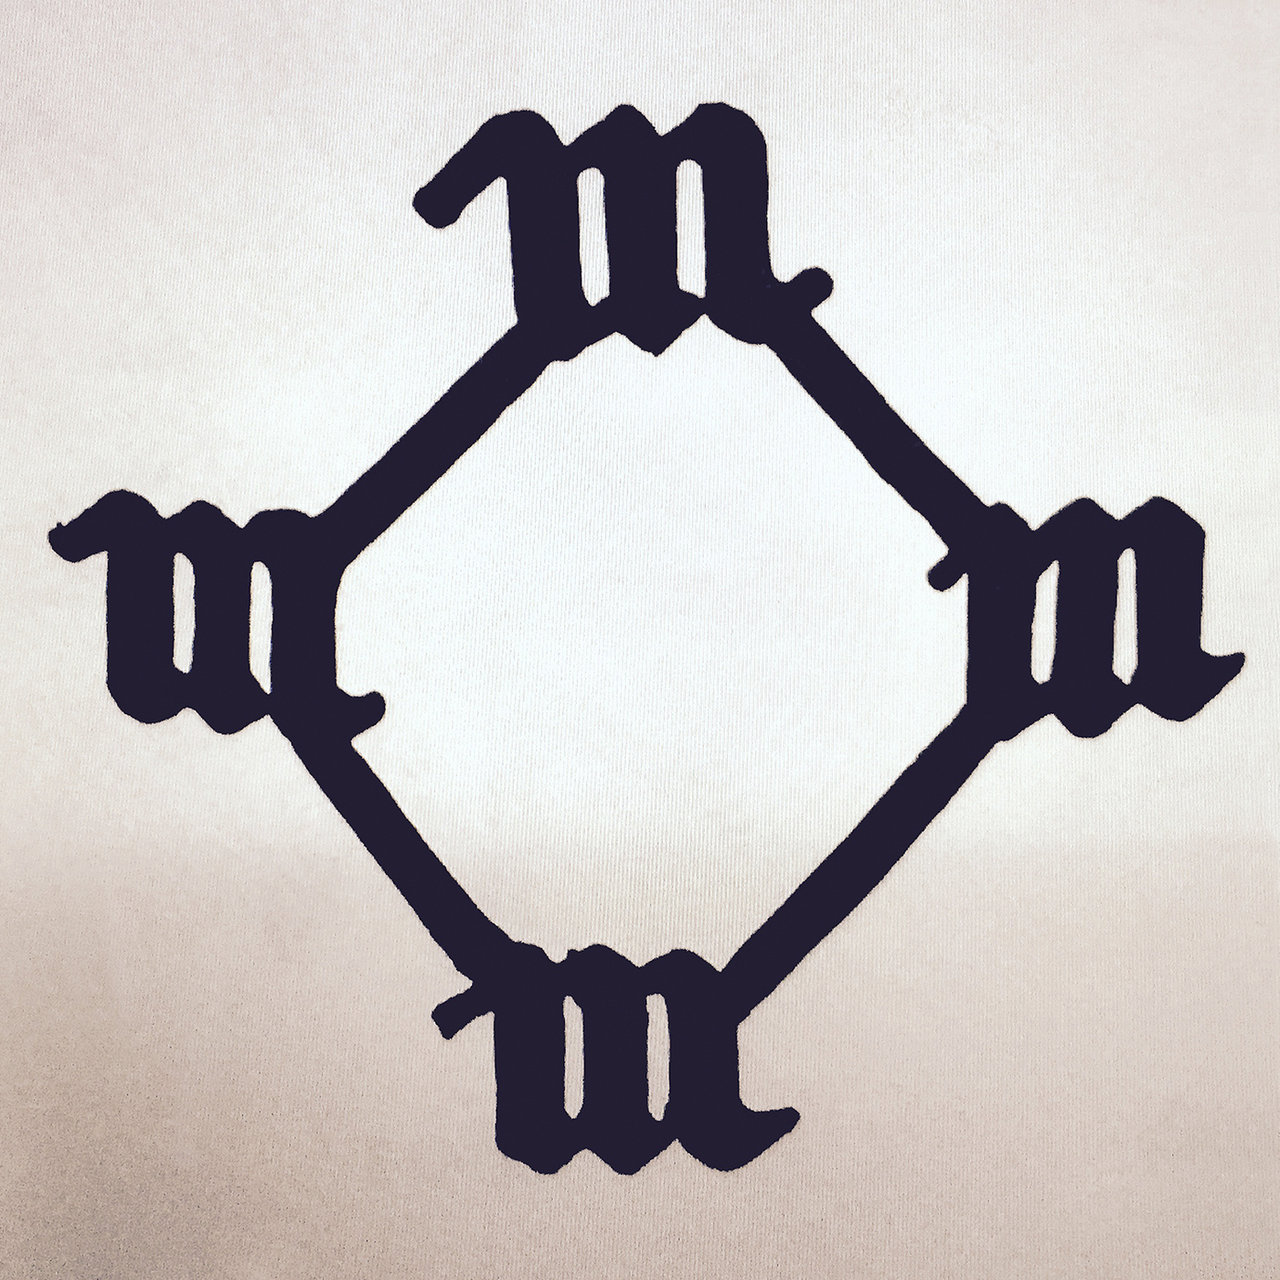 Kanye West - All Day (ft. Theophilus London, Allan Kingdom And Paul McCartney) (Cover)